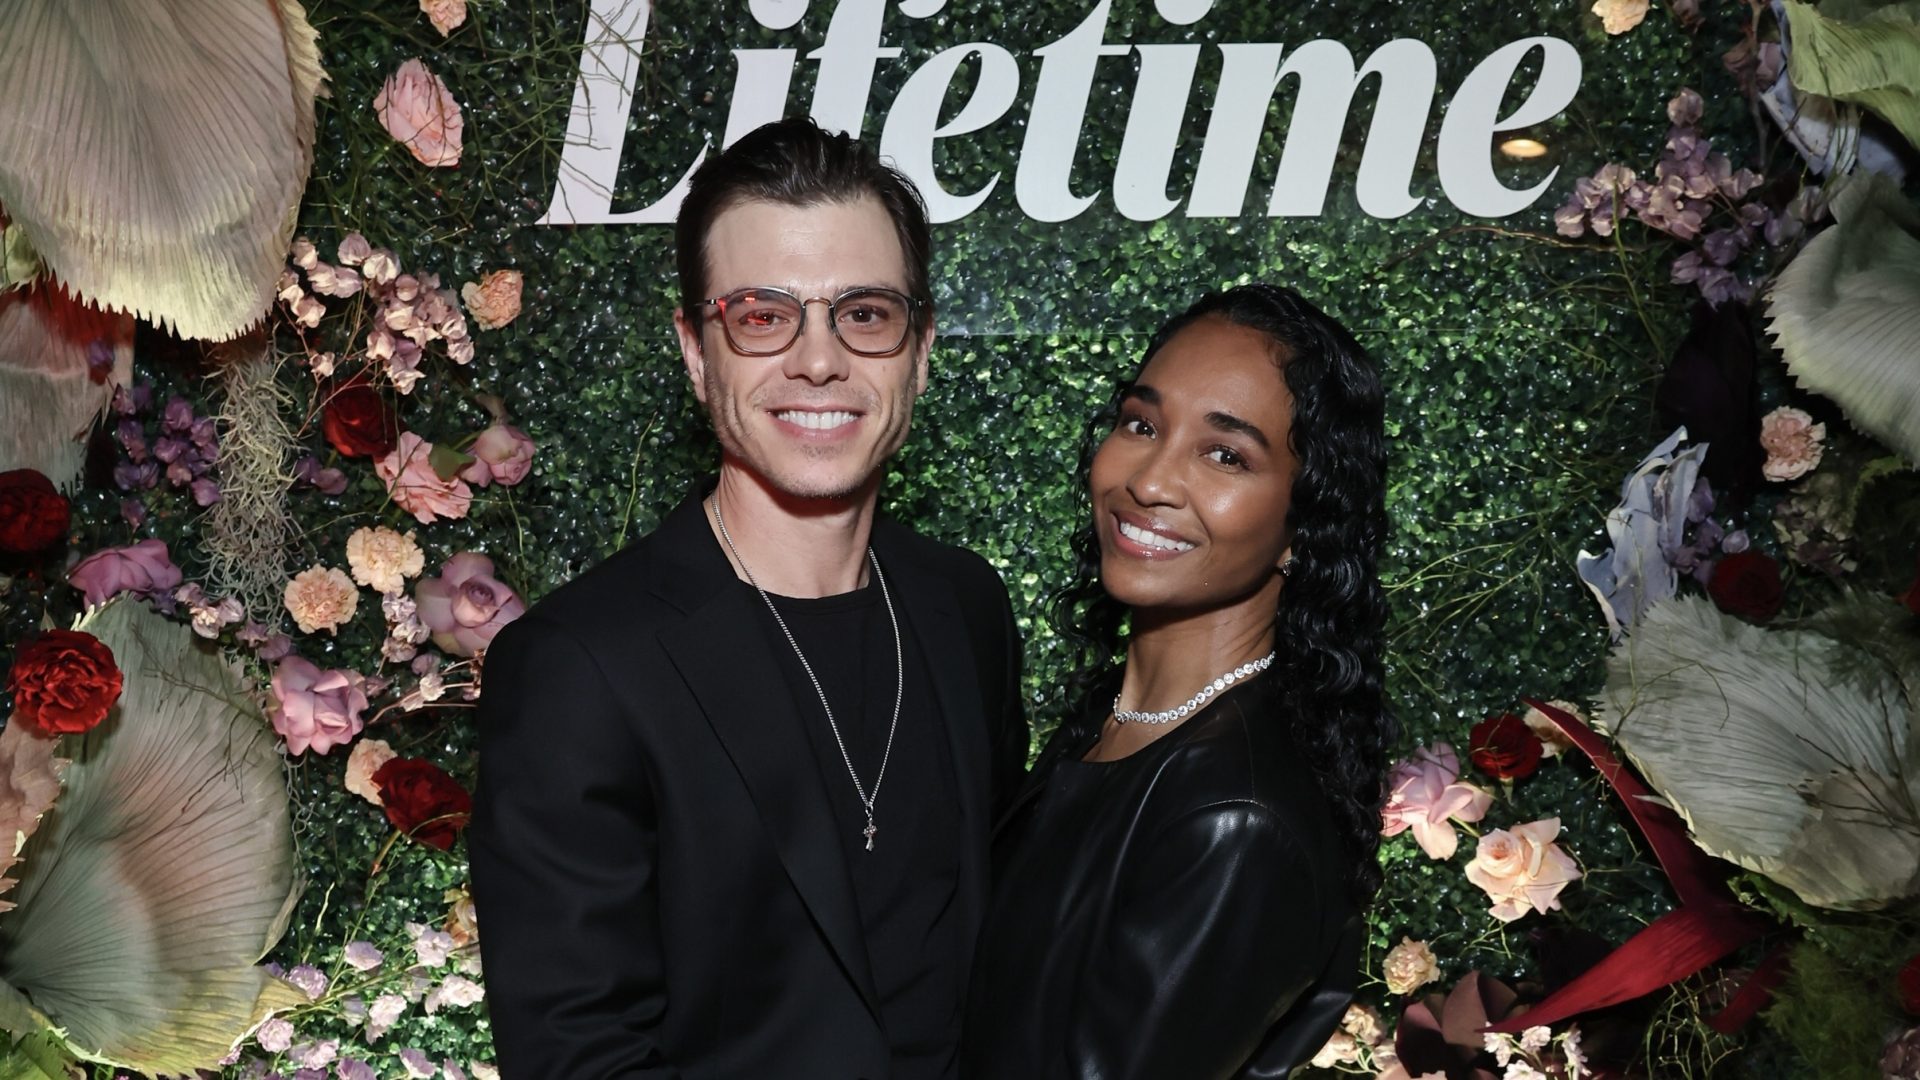 Chilli Clarifies Boyfriend Matthew Lawrence’s Comment About Them ‘Trying’ To Have Kids: ‘That’s Not What’s Happening’